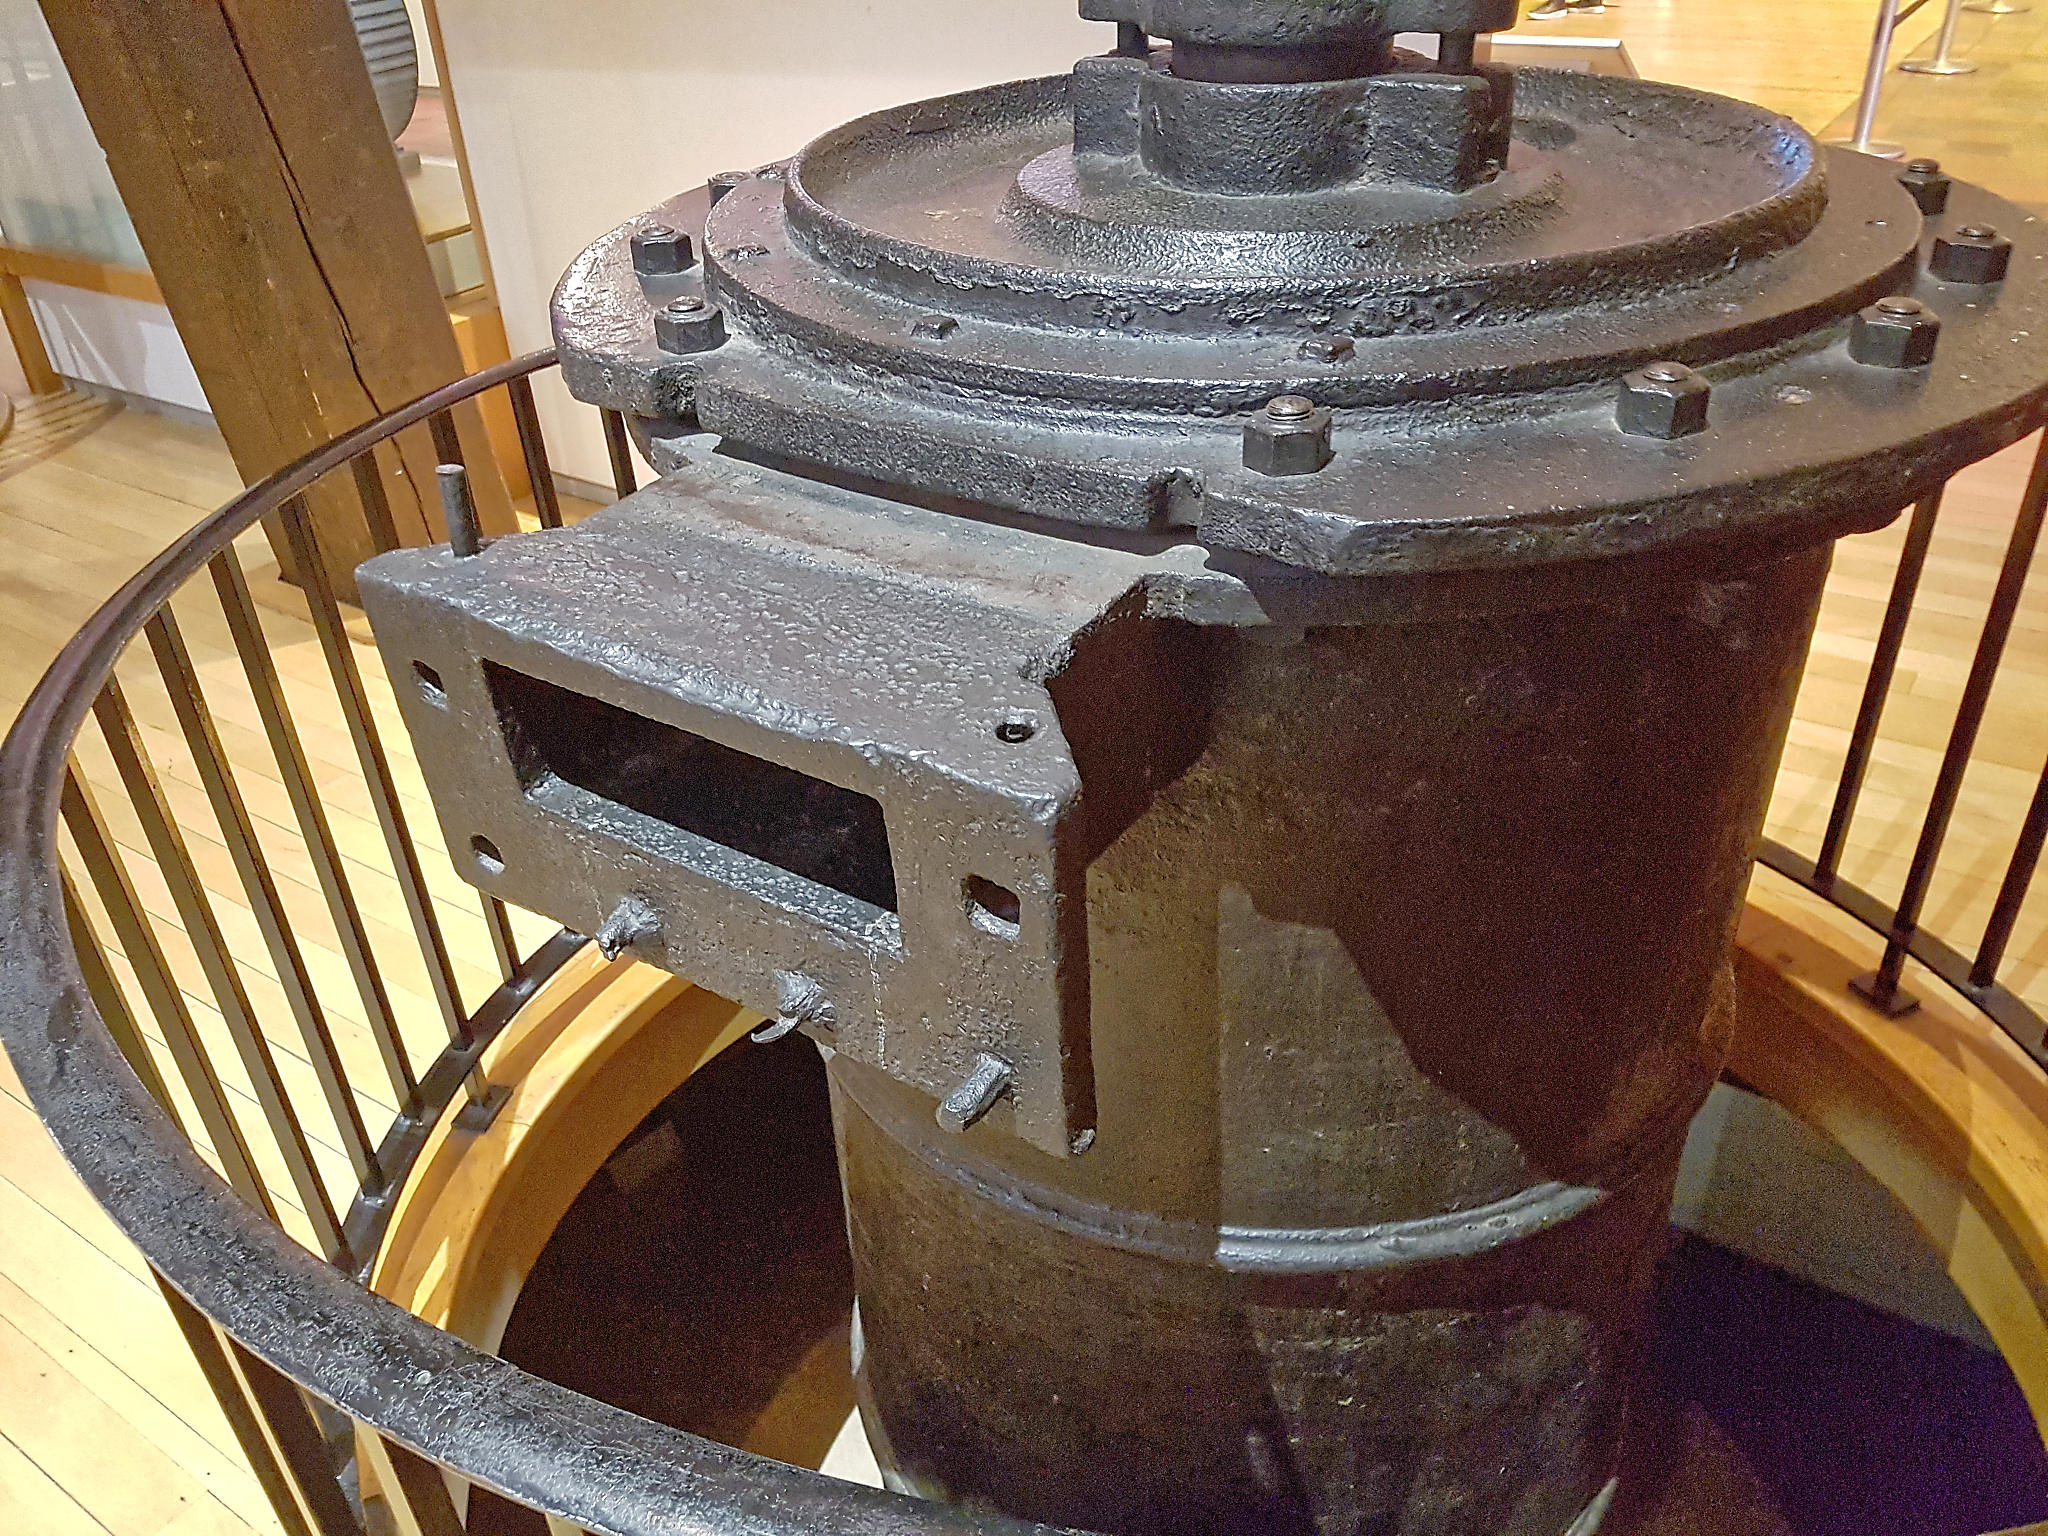 Photograph of a 33 inch engine cylinder on display in the Science Museum, London. It is painted black, is surrounded by a protective railing, and has a rectangular steam port very similar to that found on the Wheel Wreck cylinder fragment C1.